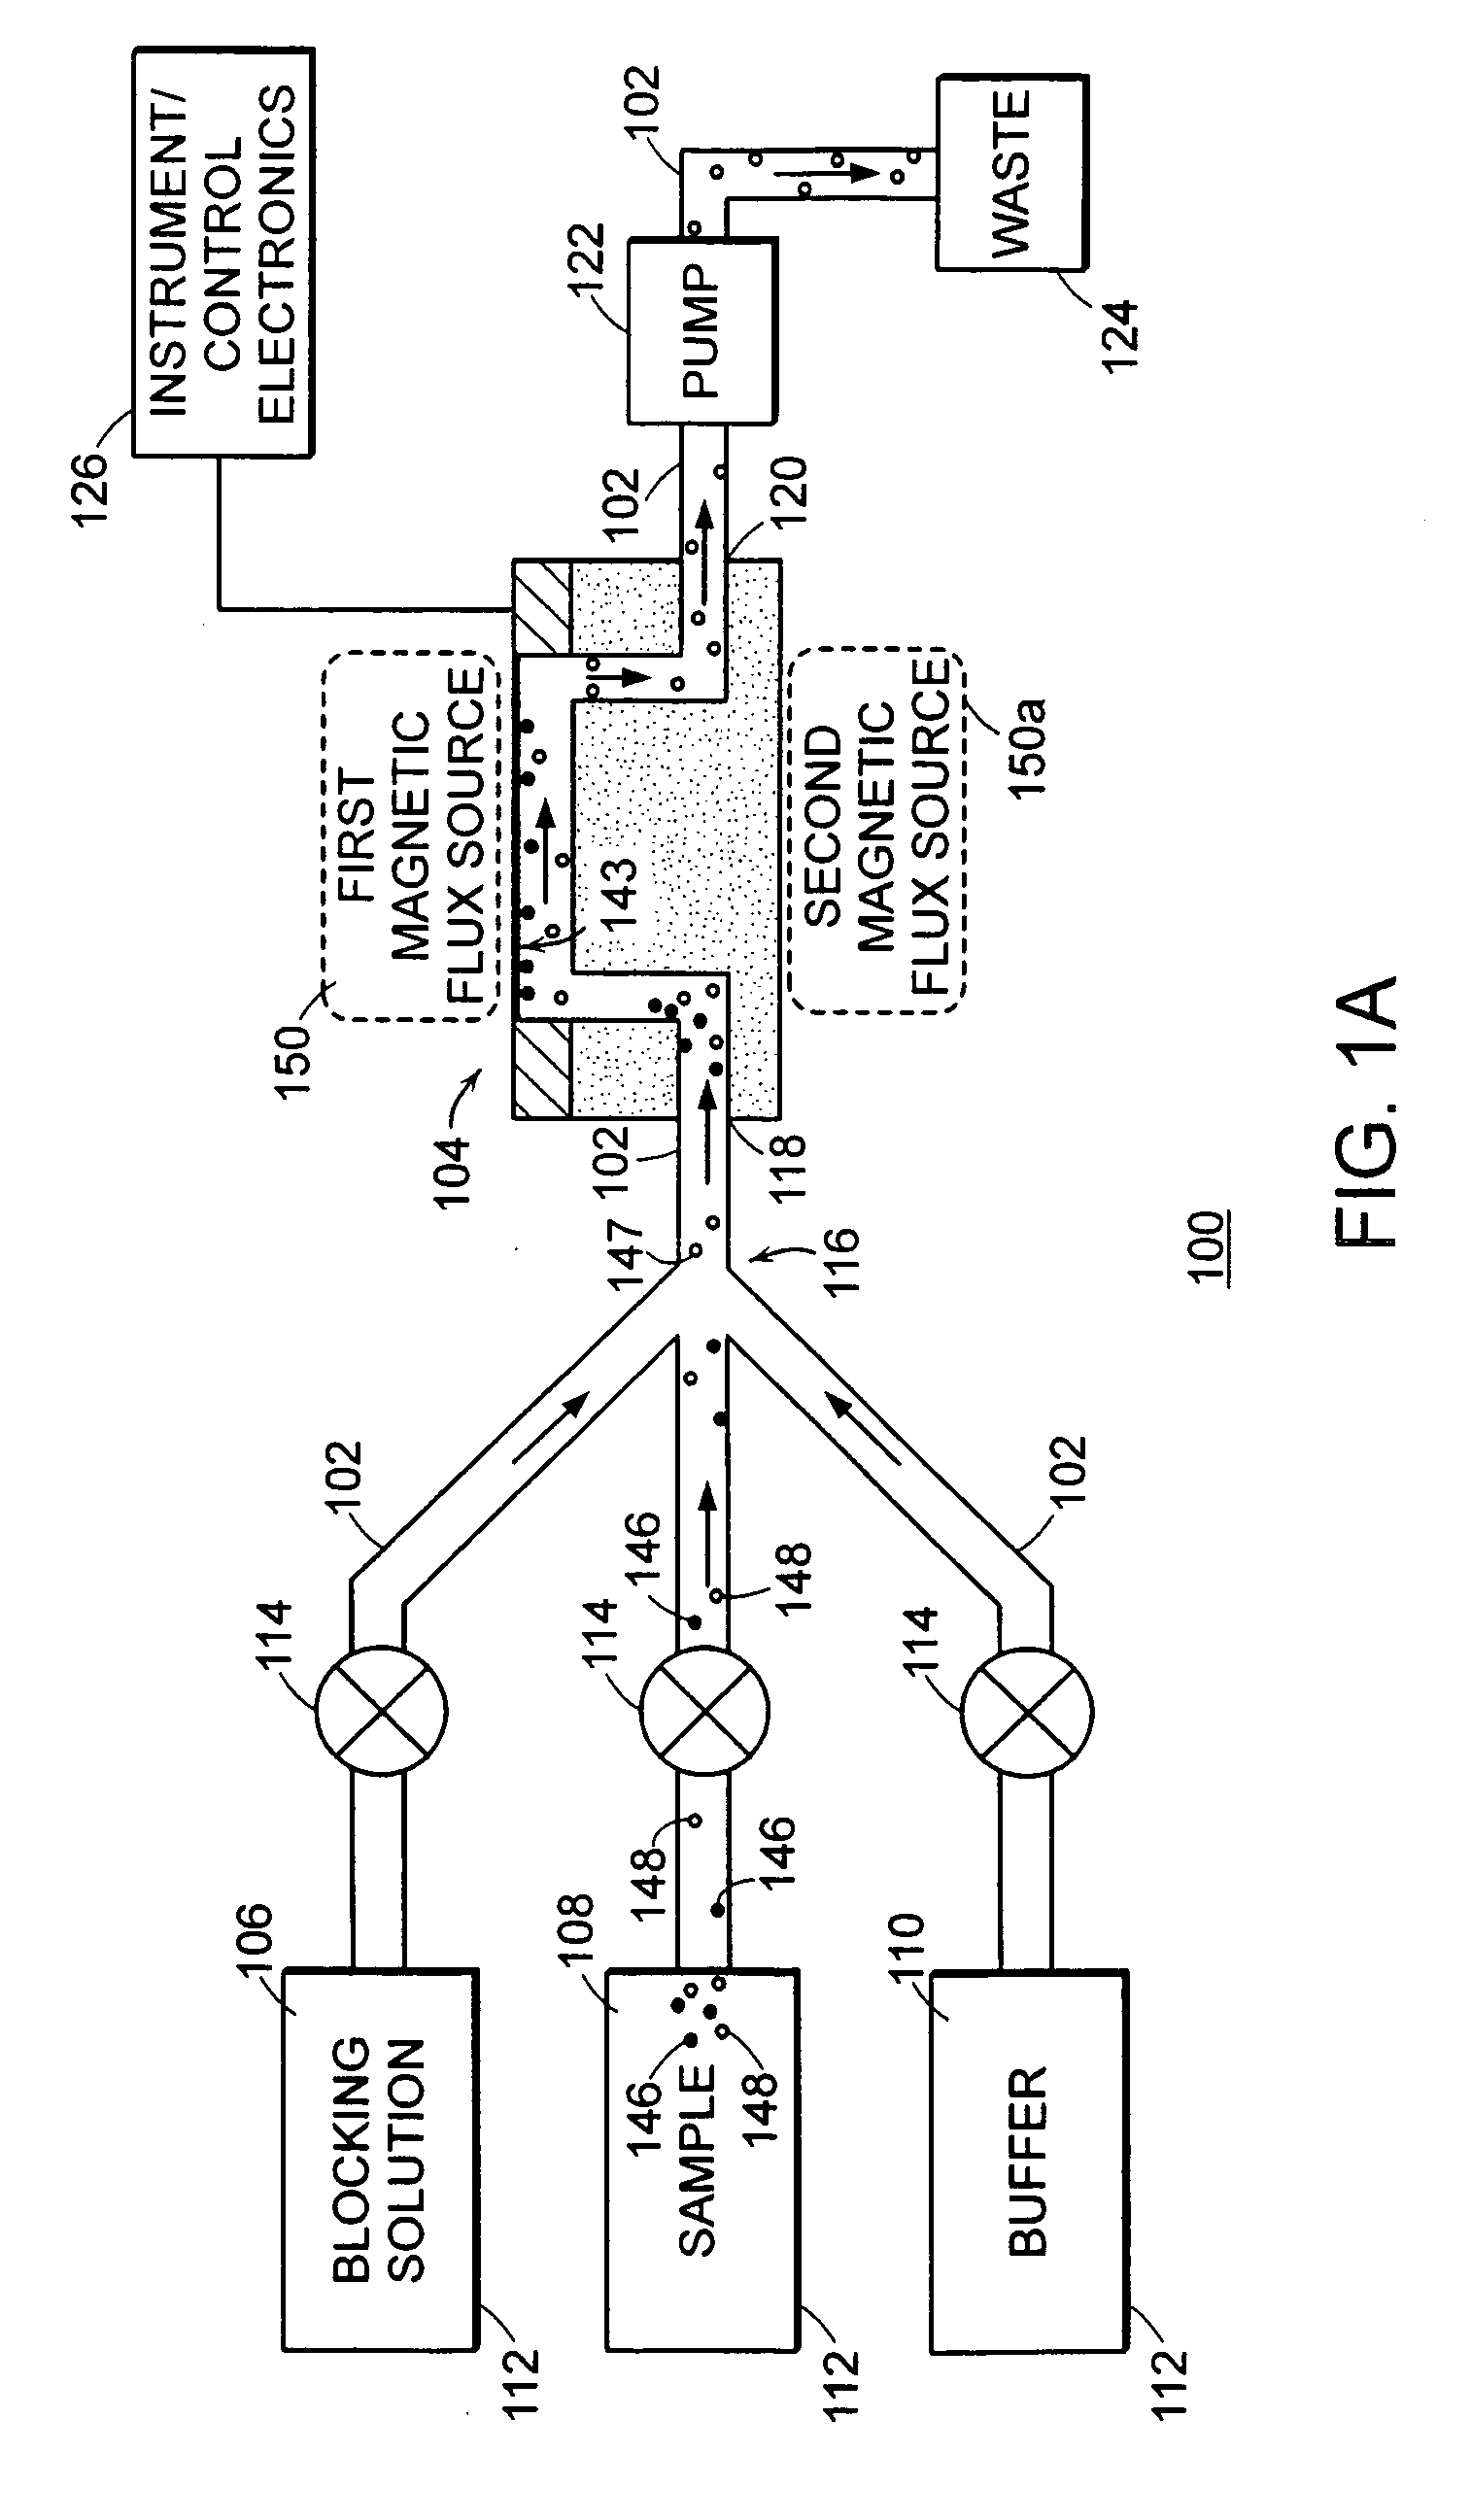 Methods and apparatus for therapeutic drug monitoring using an acoustic device